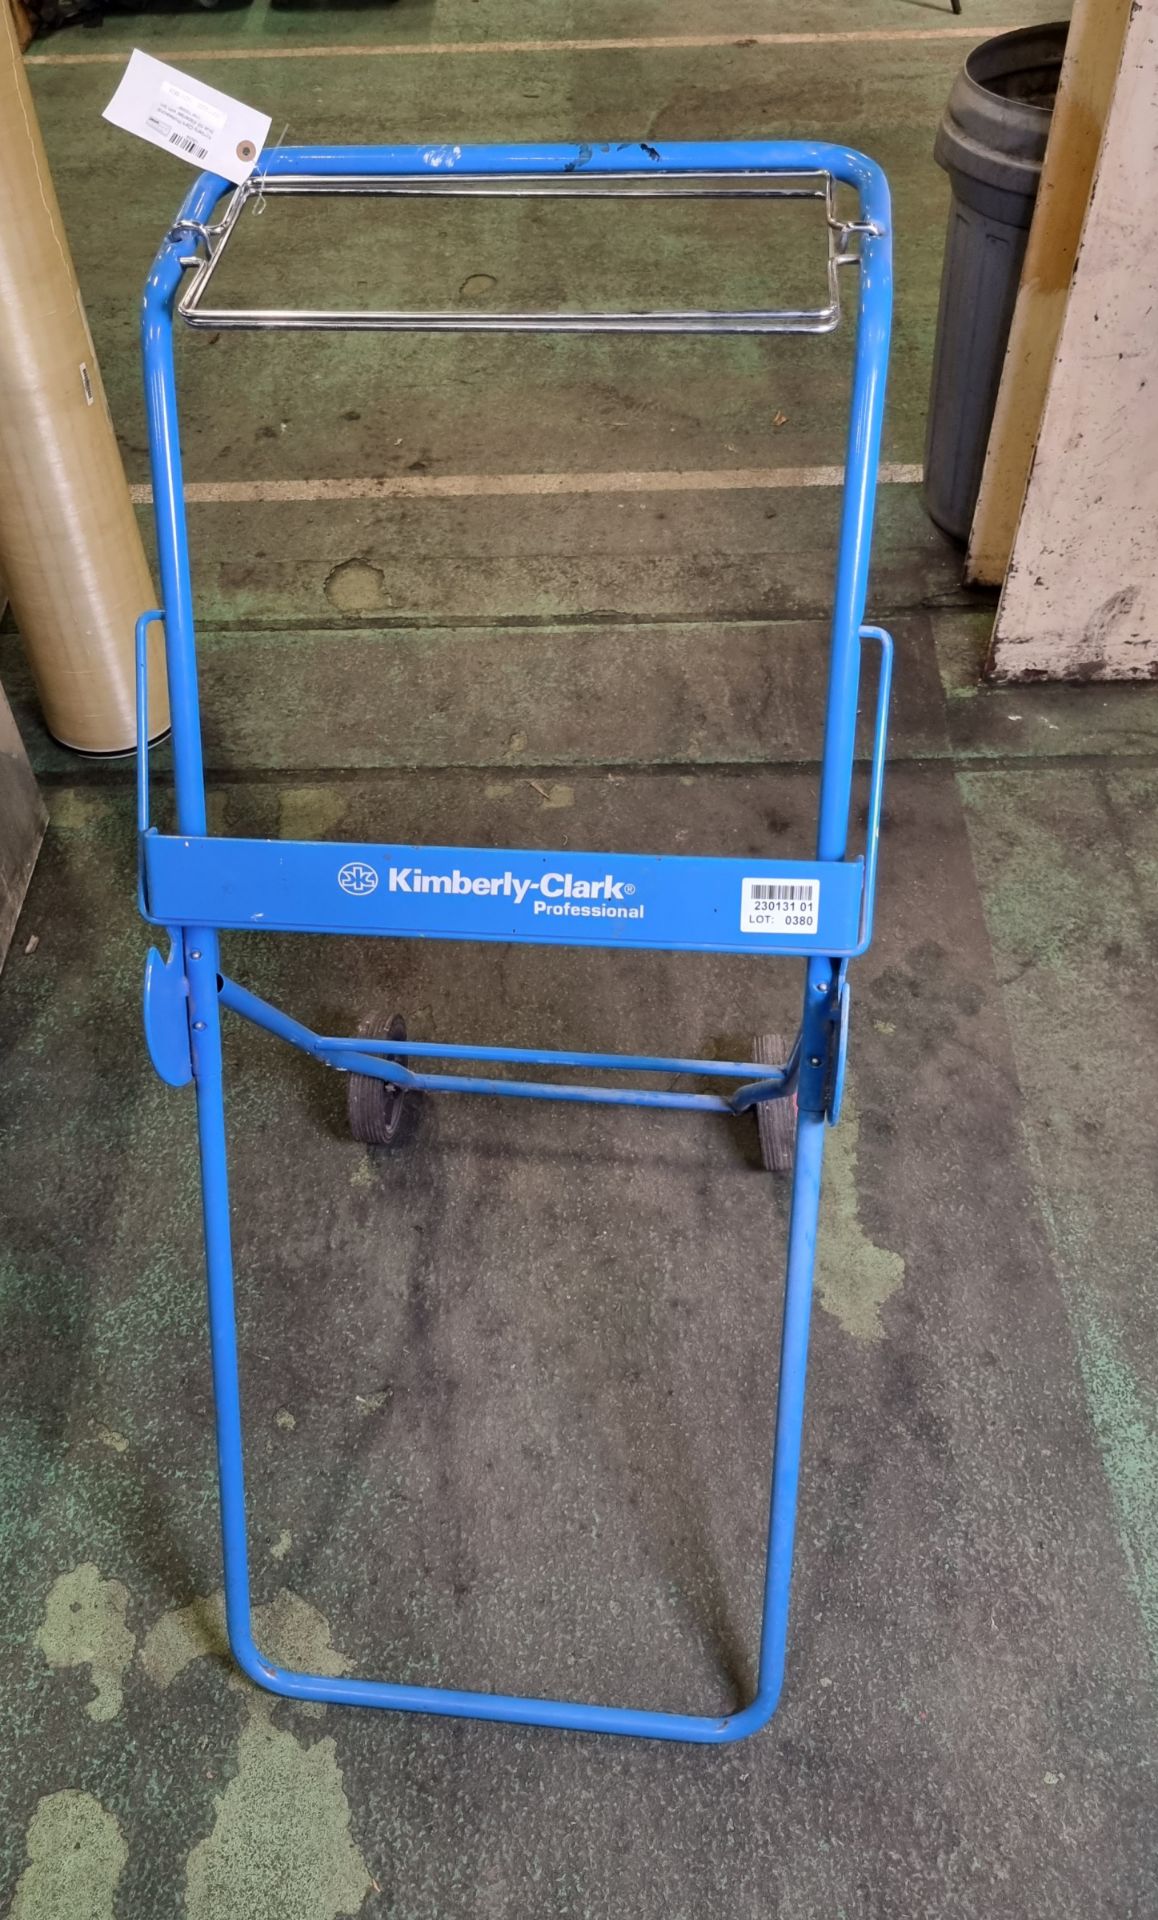 Kimberly Clark Professional blue roll dispenser trolley with bin liner holder - Image 2 of 4